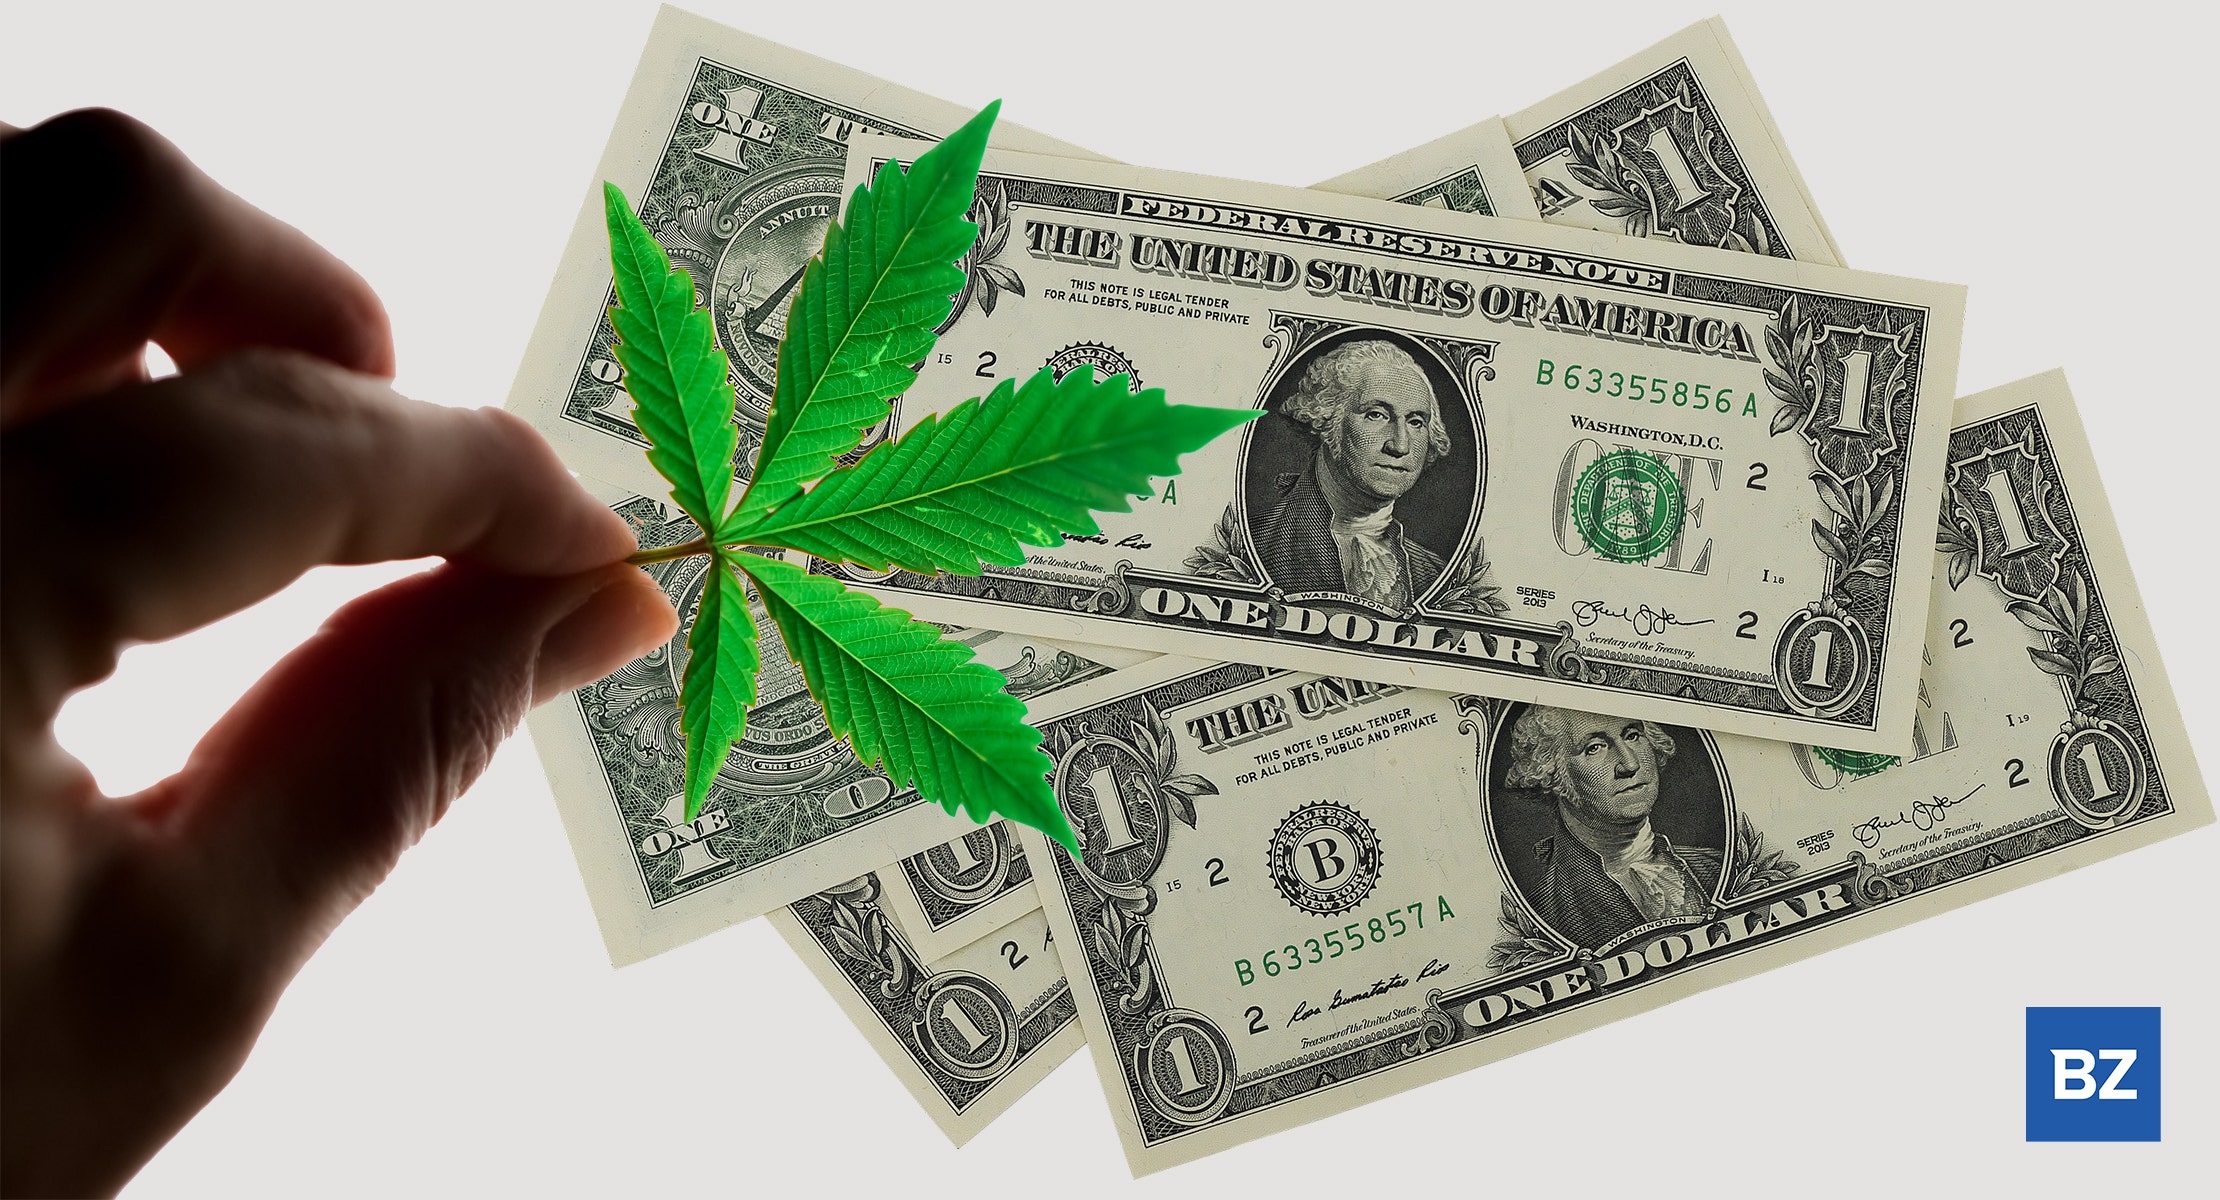 As US Cannabis Sales Decline, This Analyst Predicts More Consolidation – Who Will Benefit?